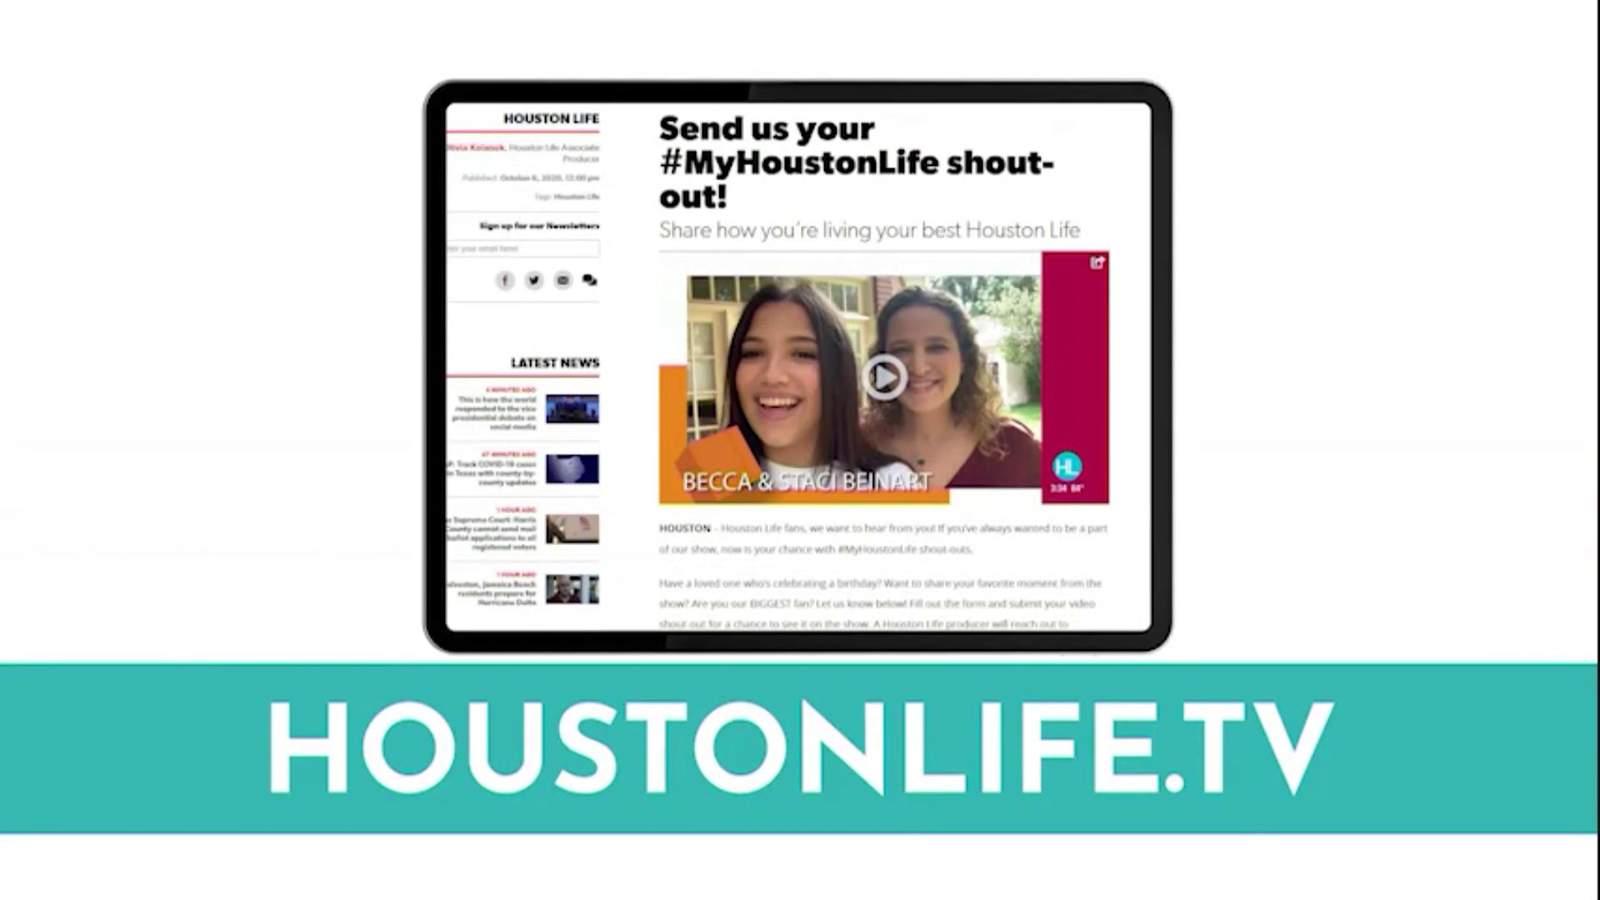 Send us your #MyHoustonLife shout-out!